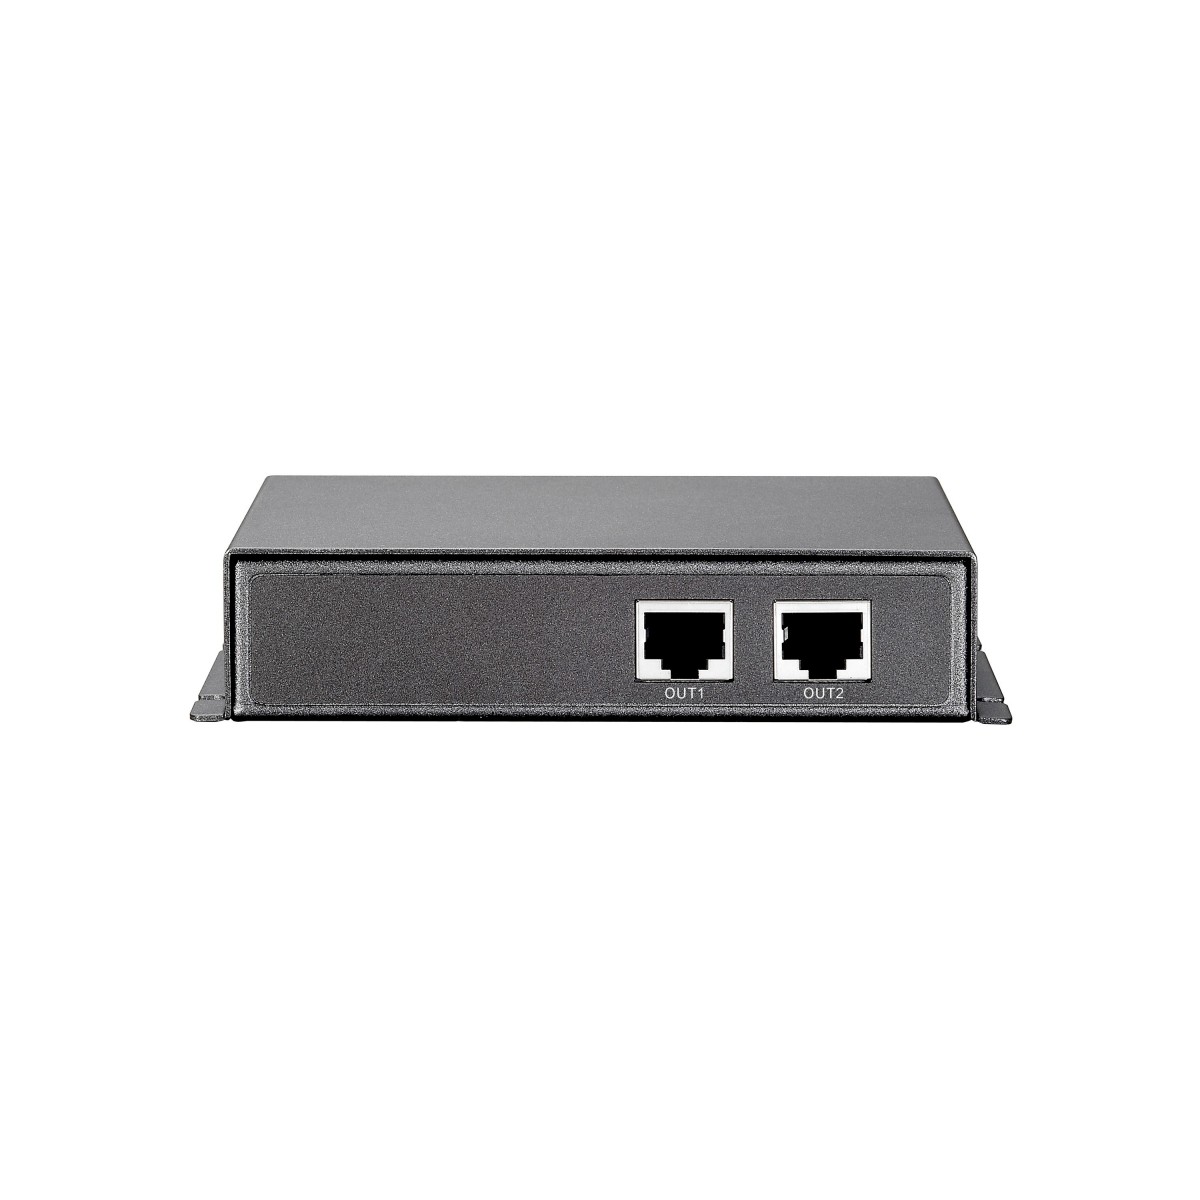 LevelOne PoE Repeater - Cascadable - 2 PoE Outputs - Network repeater - 100 m - 10/100Base-T(X) - IEEE 802.3,IEEE 802.3af,IEEE 8